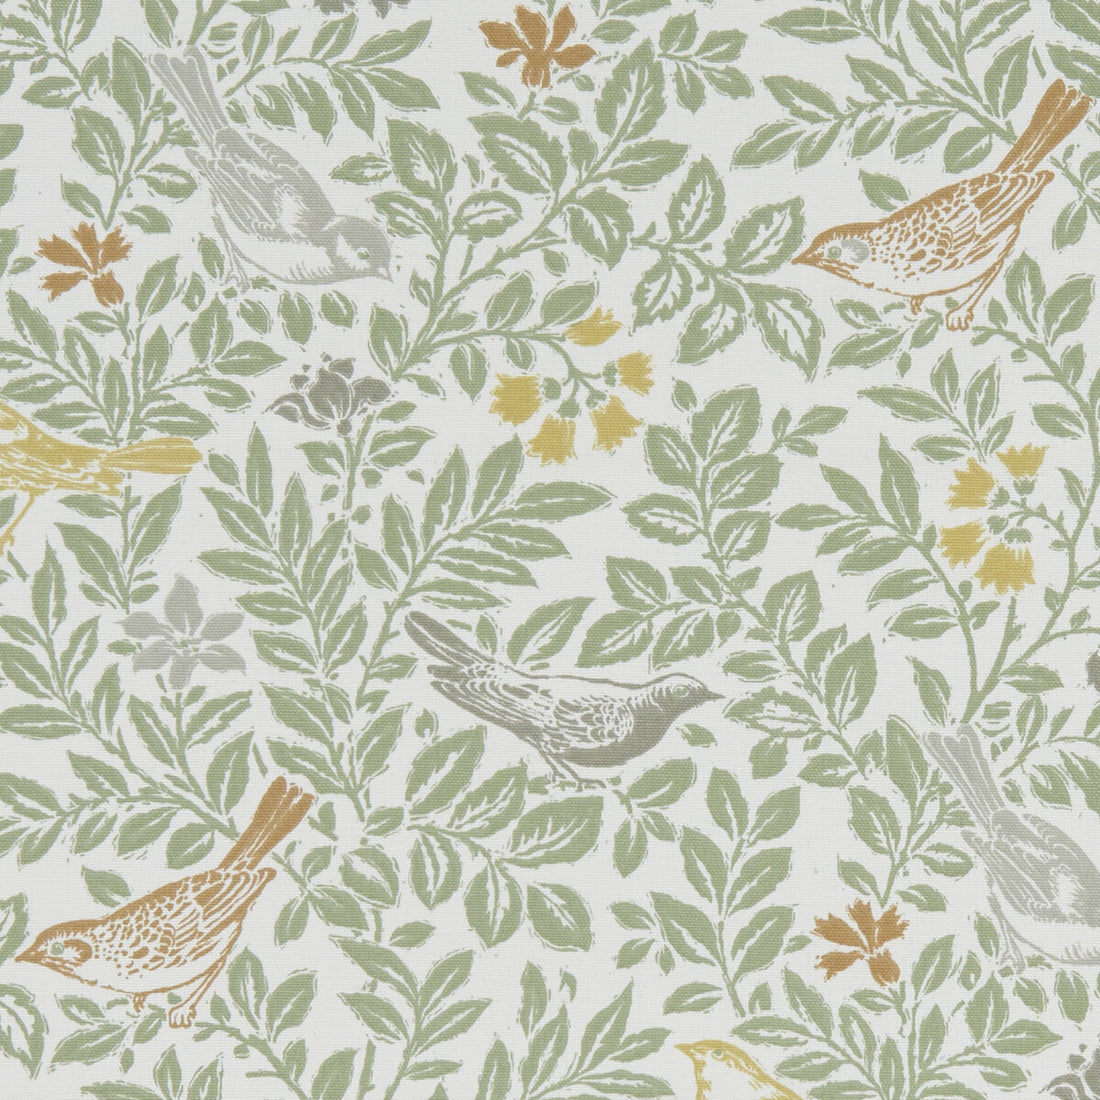 Bird Song fabric in autumn color - pattern F1184/01.CAC.0 - by Clarke And Clarke in the Land &amp; Sea By Studio G For C&amp;C collection